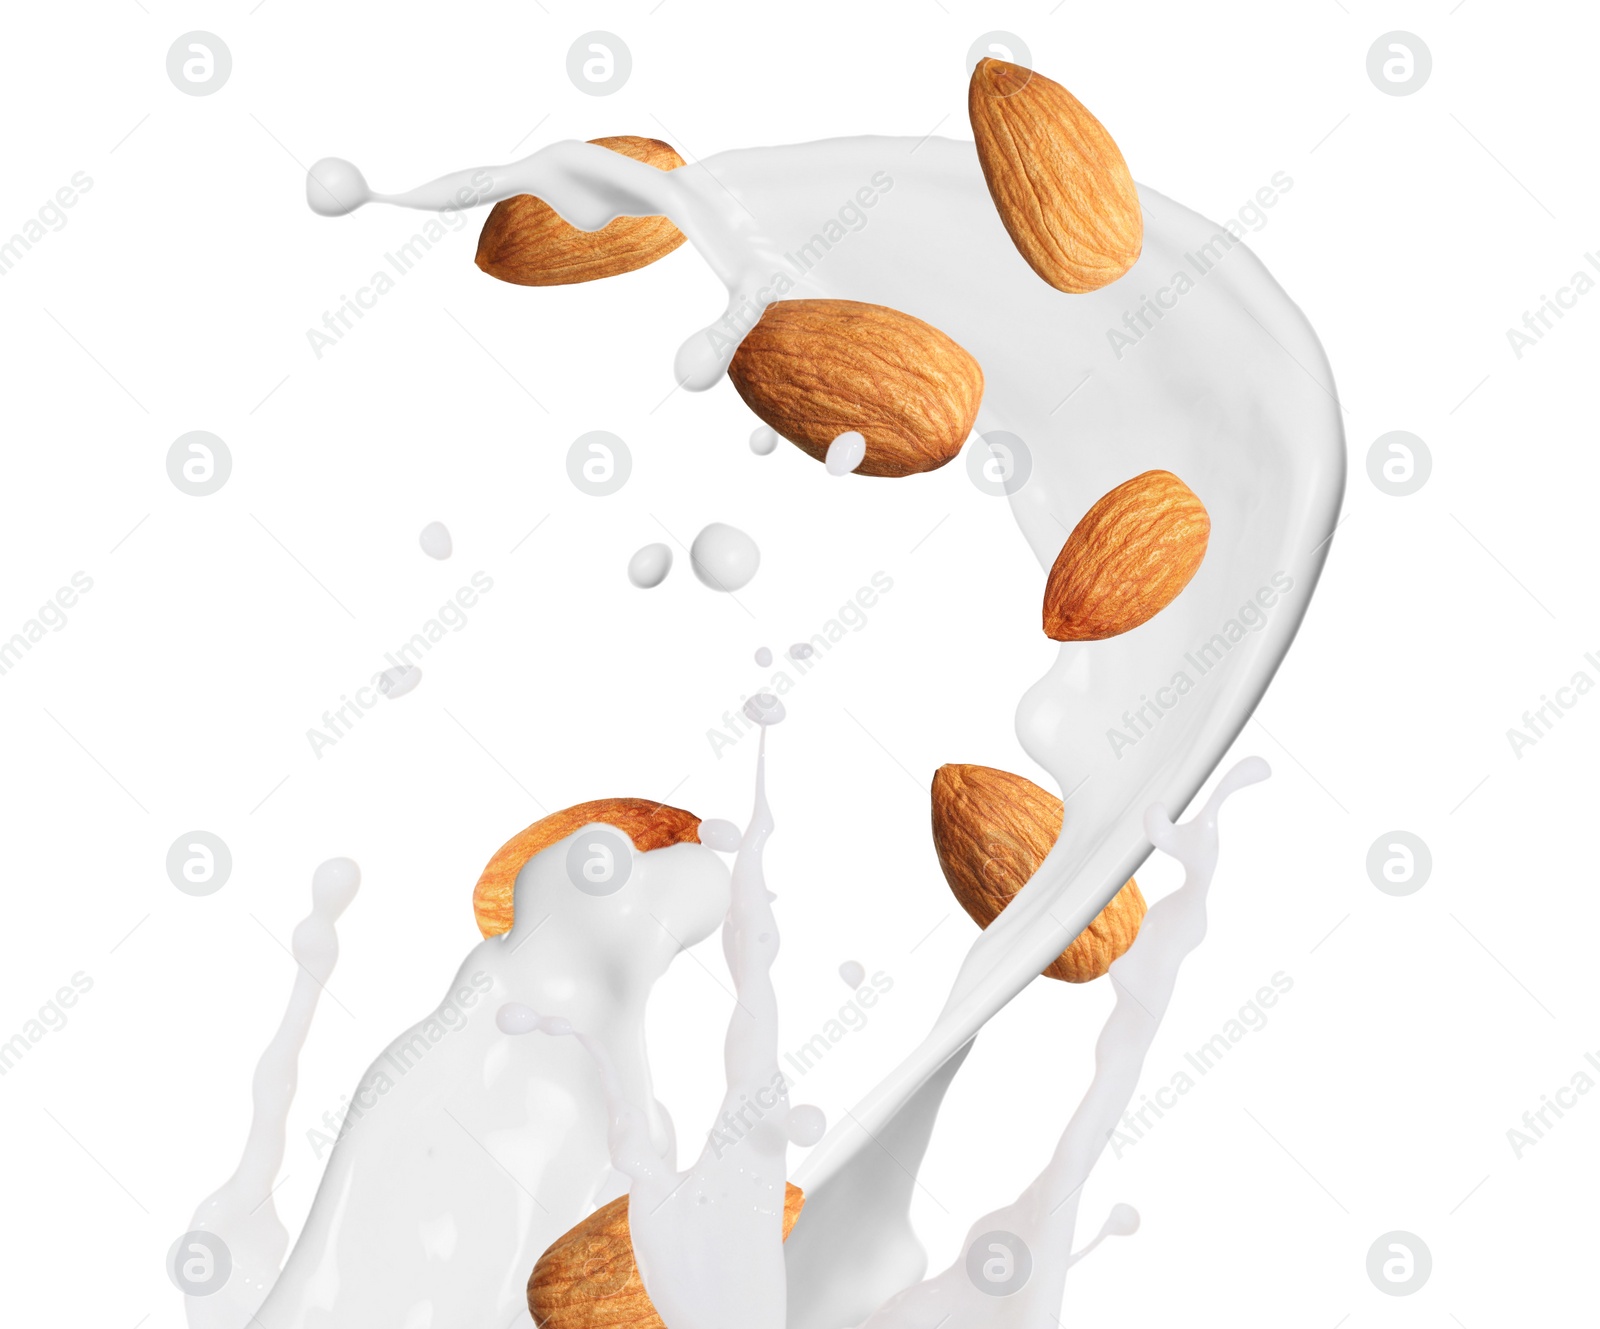 Image of Delicious almond milk and nuts on white background